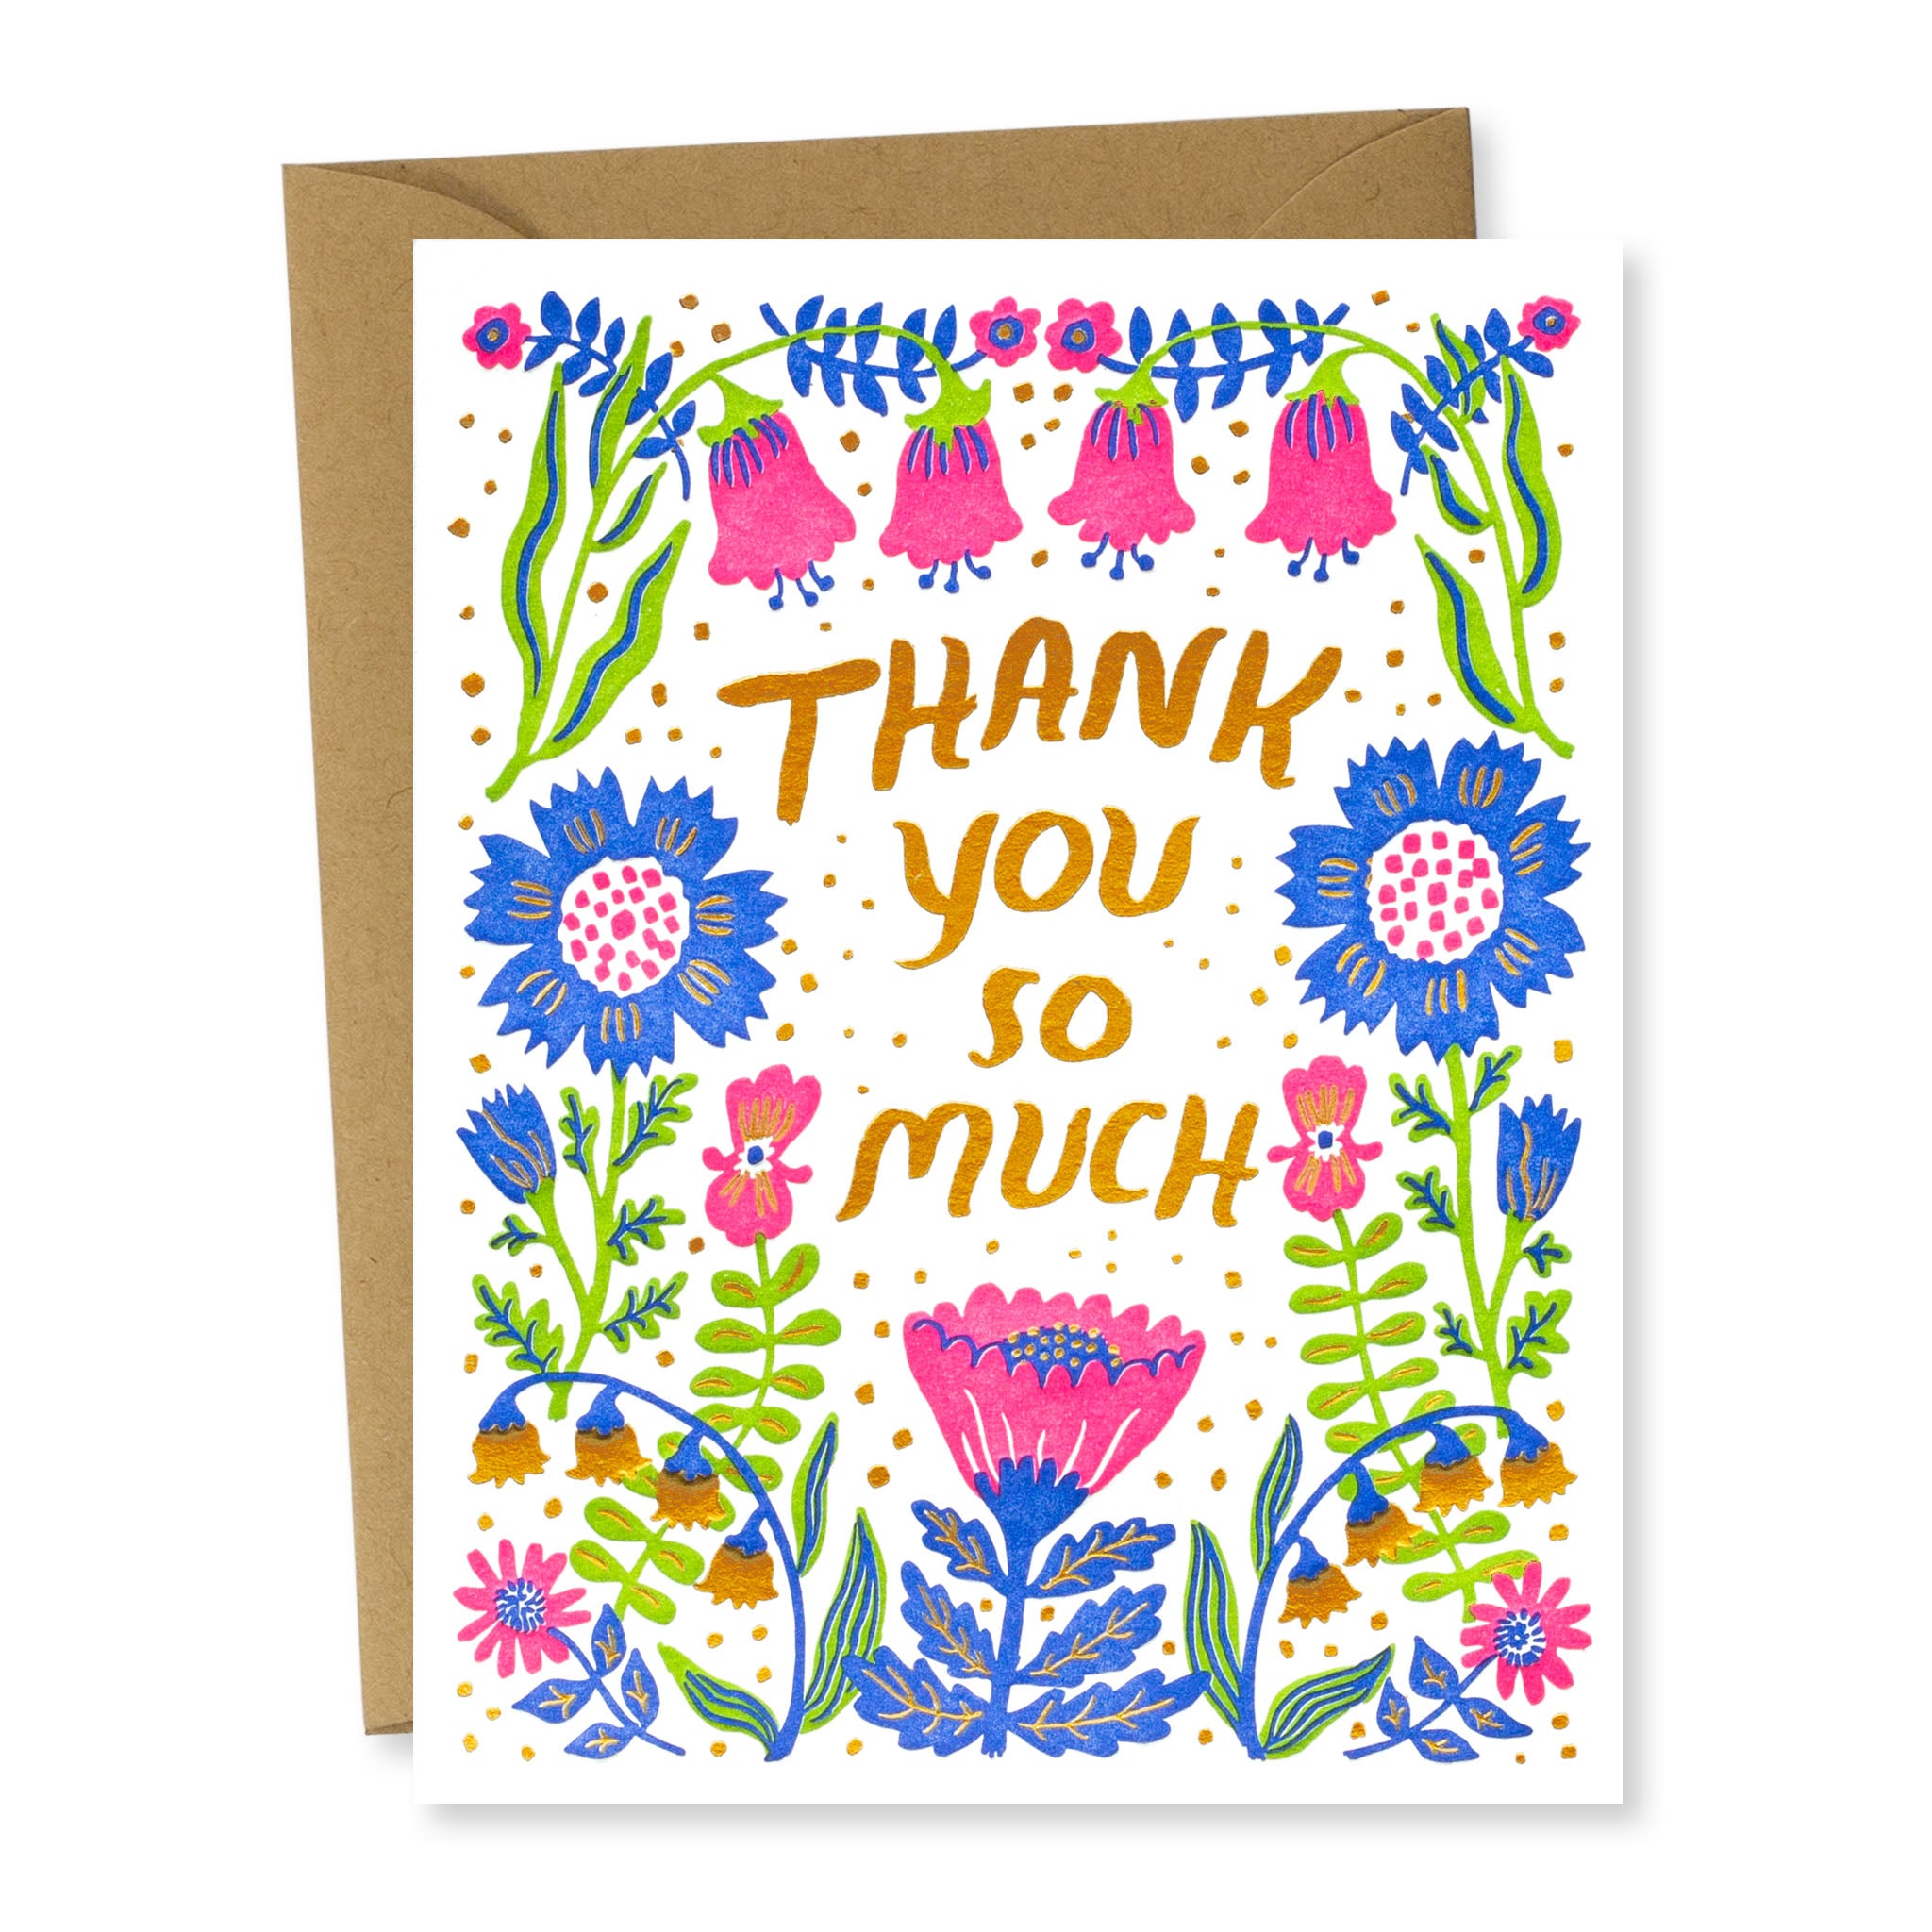 Phoebe Wahl: Thank you Wildflowers